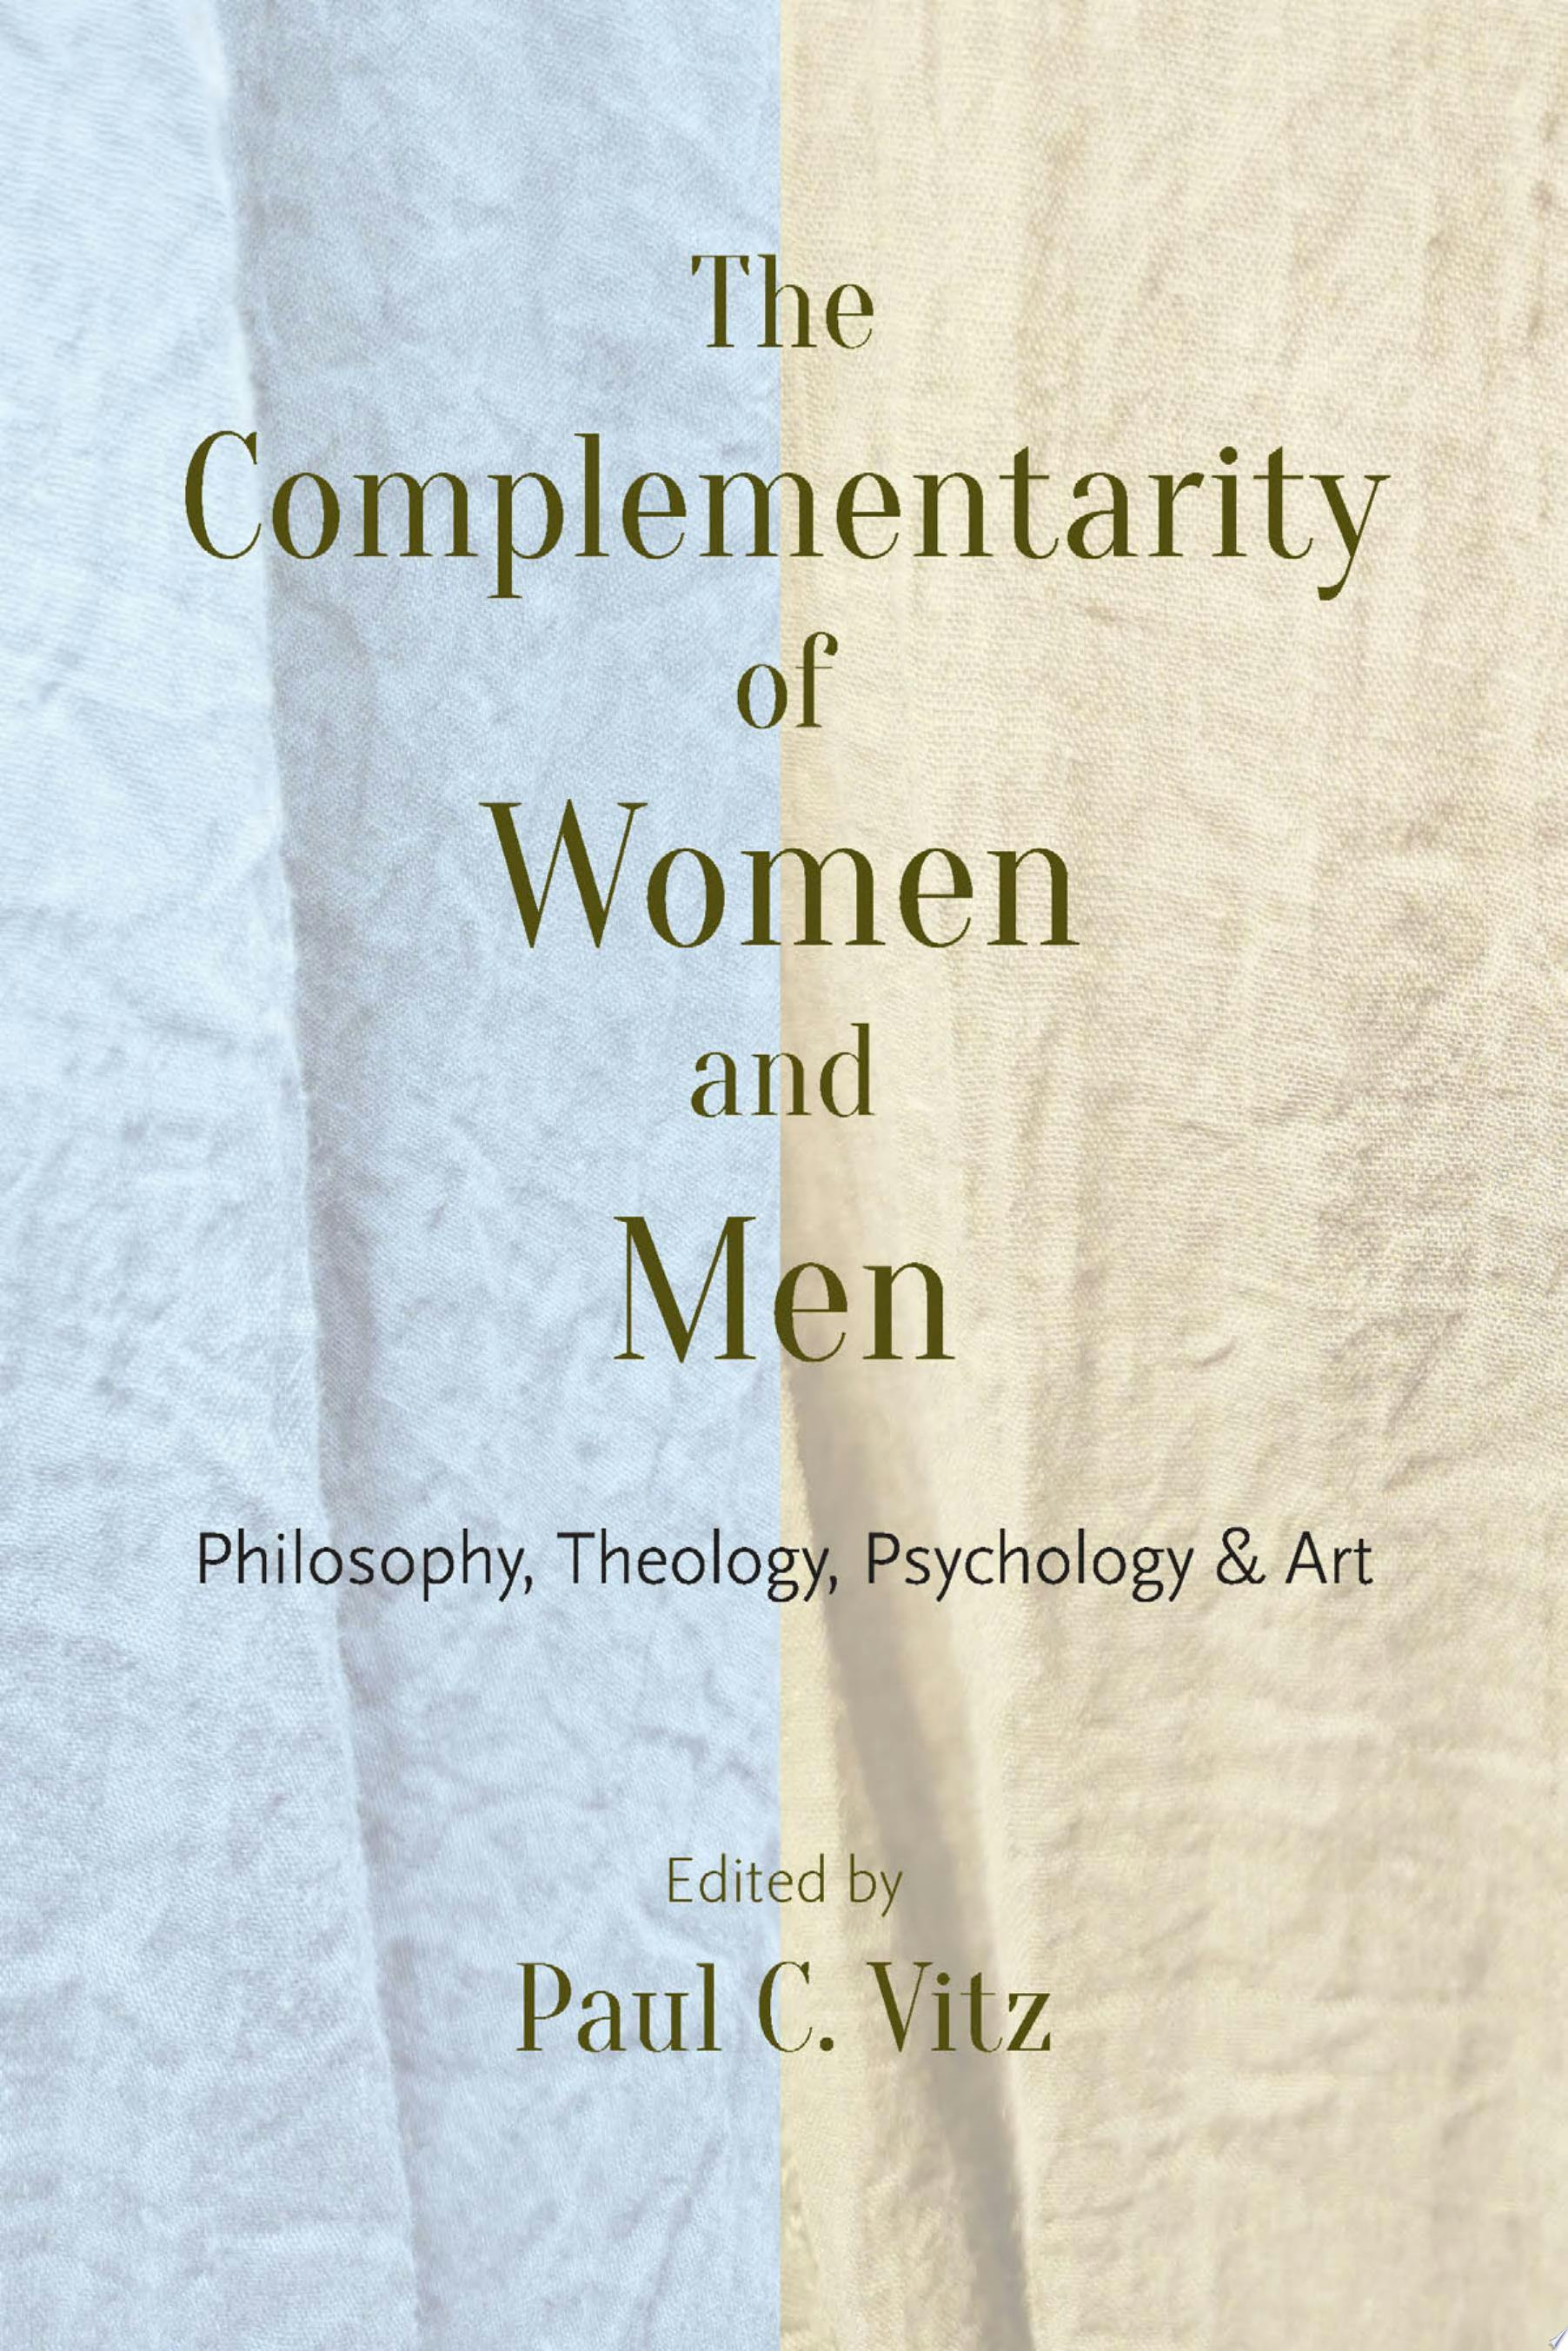 The Complementarity of Women and Men: Philosophy, Theology, Psychology, and Art